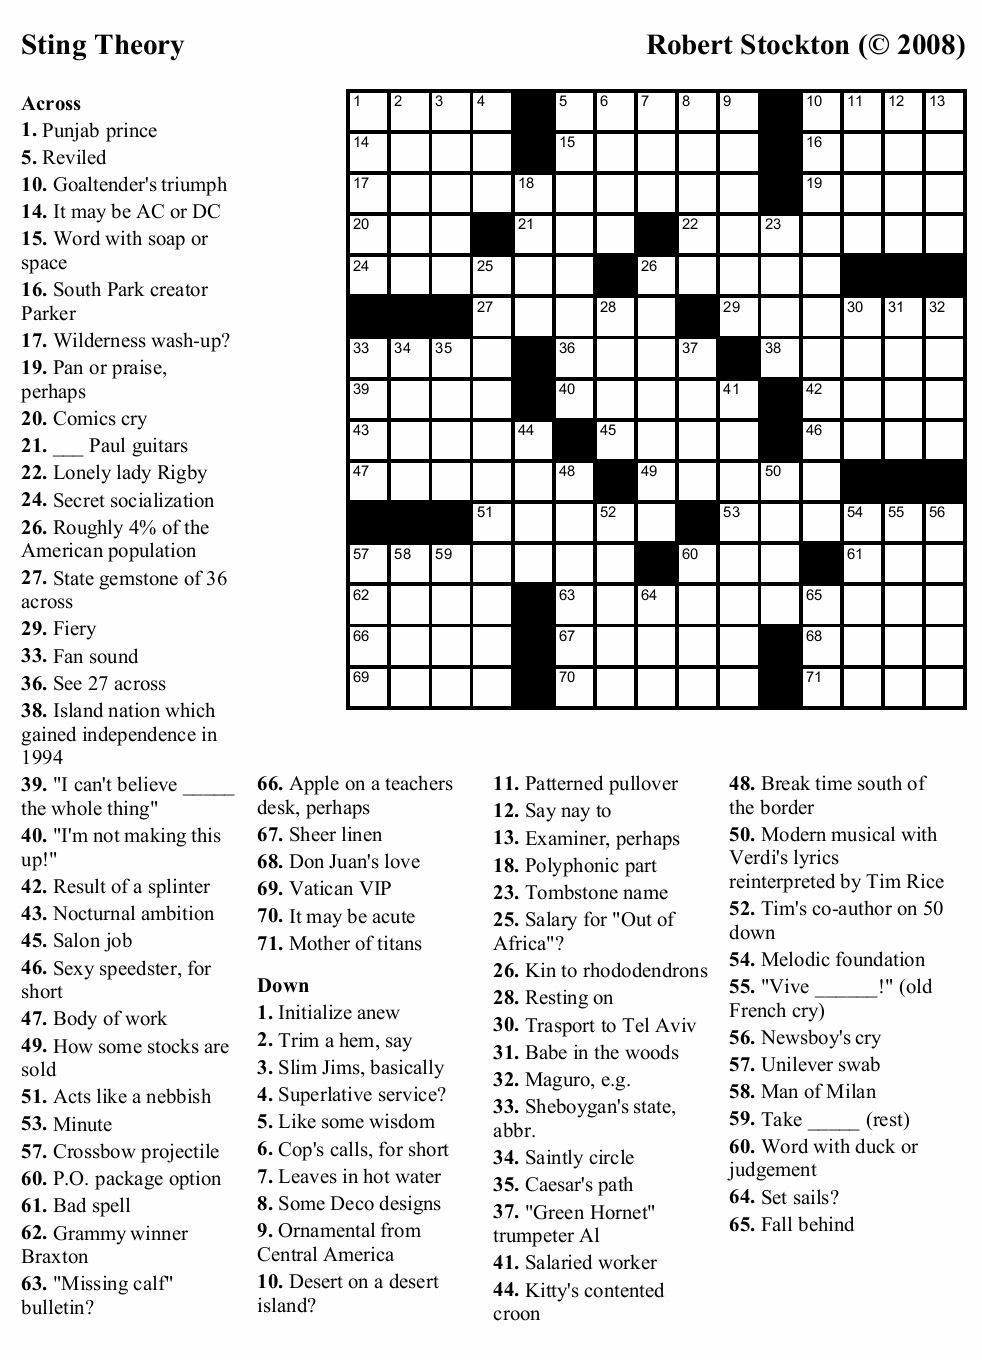 Printable Crossword Puzzles Nytimes | Printable Crossword Puzzles - Ny Times Free Print Crossword